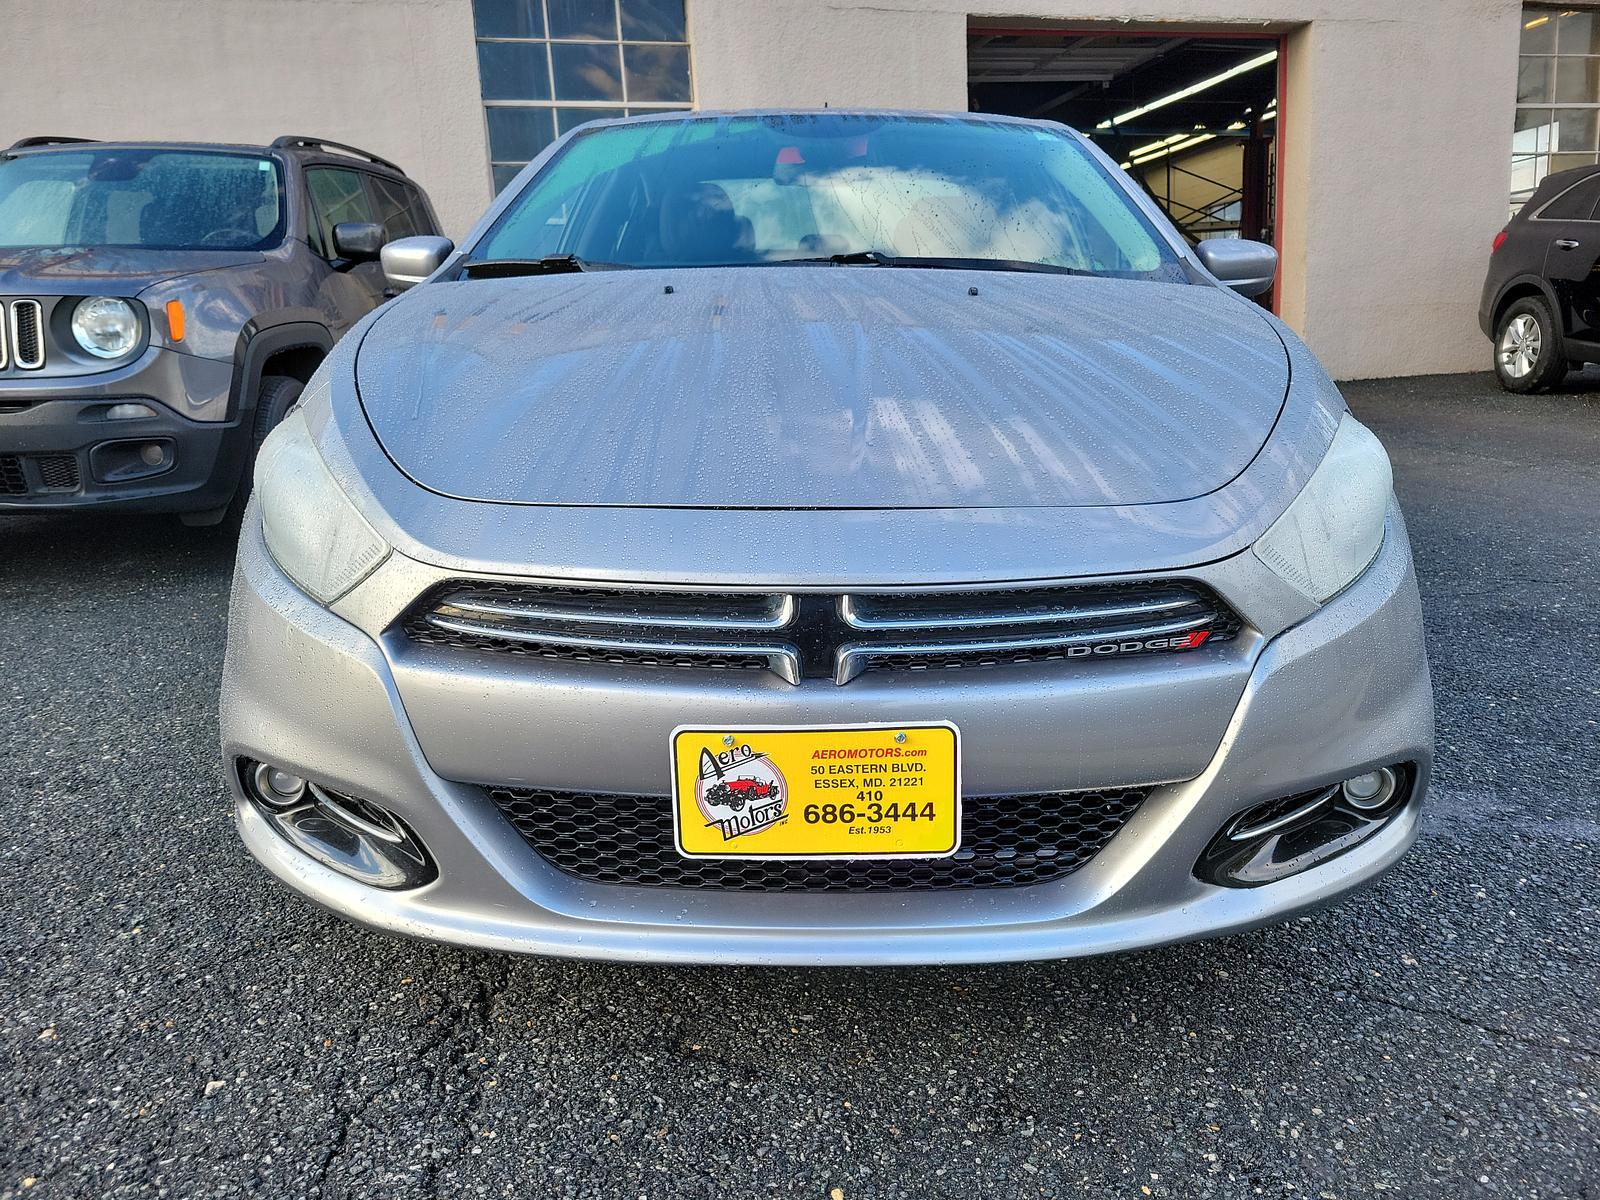 2016 QUARTZ /Black DODGE DART SXT Sport (1C3CDFFA7GD) with an ENGINE: 2.0L I4 DOHC engine, located at 50 Eastern Blvd., Essex, MD, 21221, (410) 686-3444, 39.304367, -76.484947 - Our 2016 Dodge Dart SXT Sedan is sleek and sporty in Billet Silver Metallic Clear Coat! Powered by a 2.4 Liter TigerShark 4 Cylinder that offers 184hp paired with a 6 Speed Automatic transmission. Our Front Wheel Drive sedan offers precise steering, steady handling, and near 35mpg on the highway whi - Photo #1